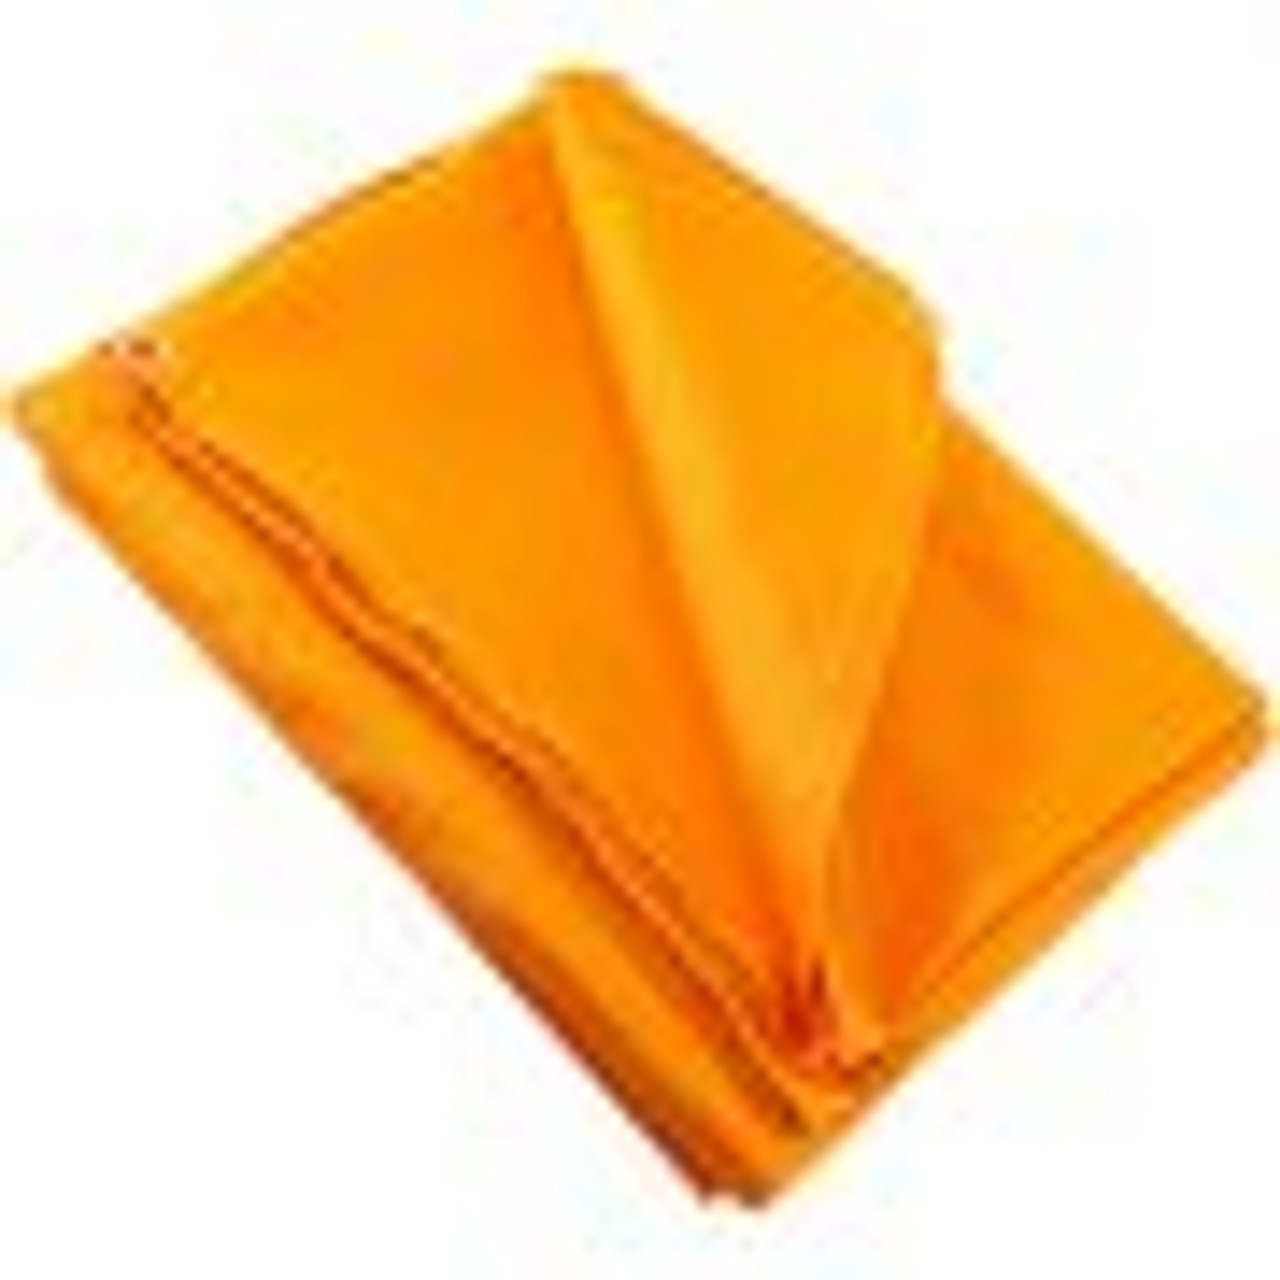 What are the recommendations for the selection of fireproof welding blankets ?